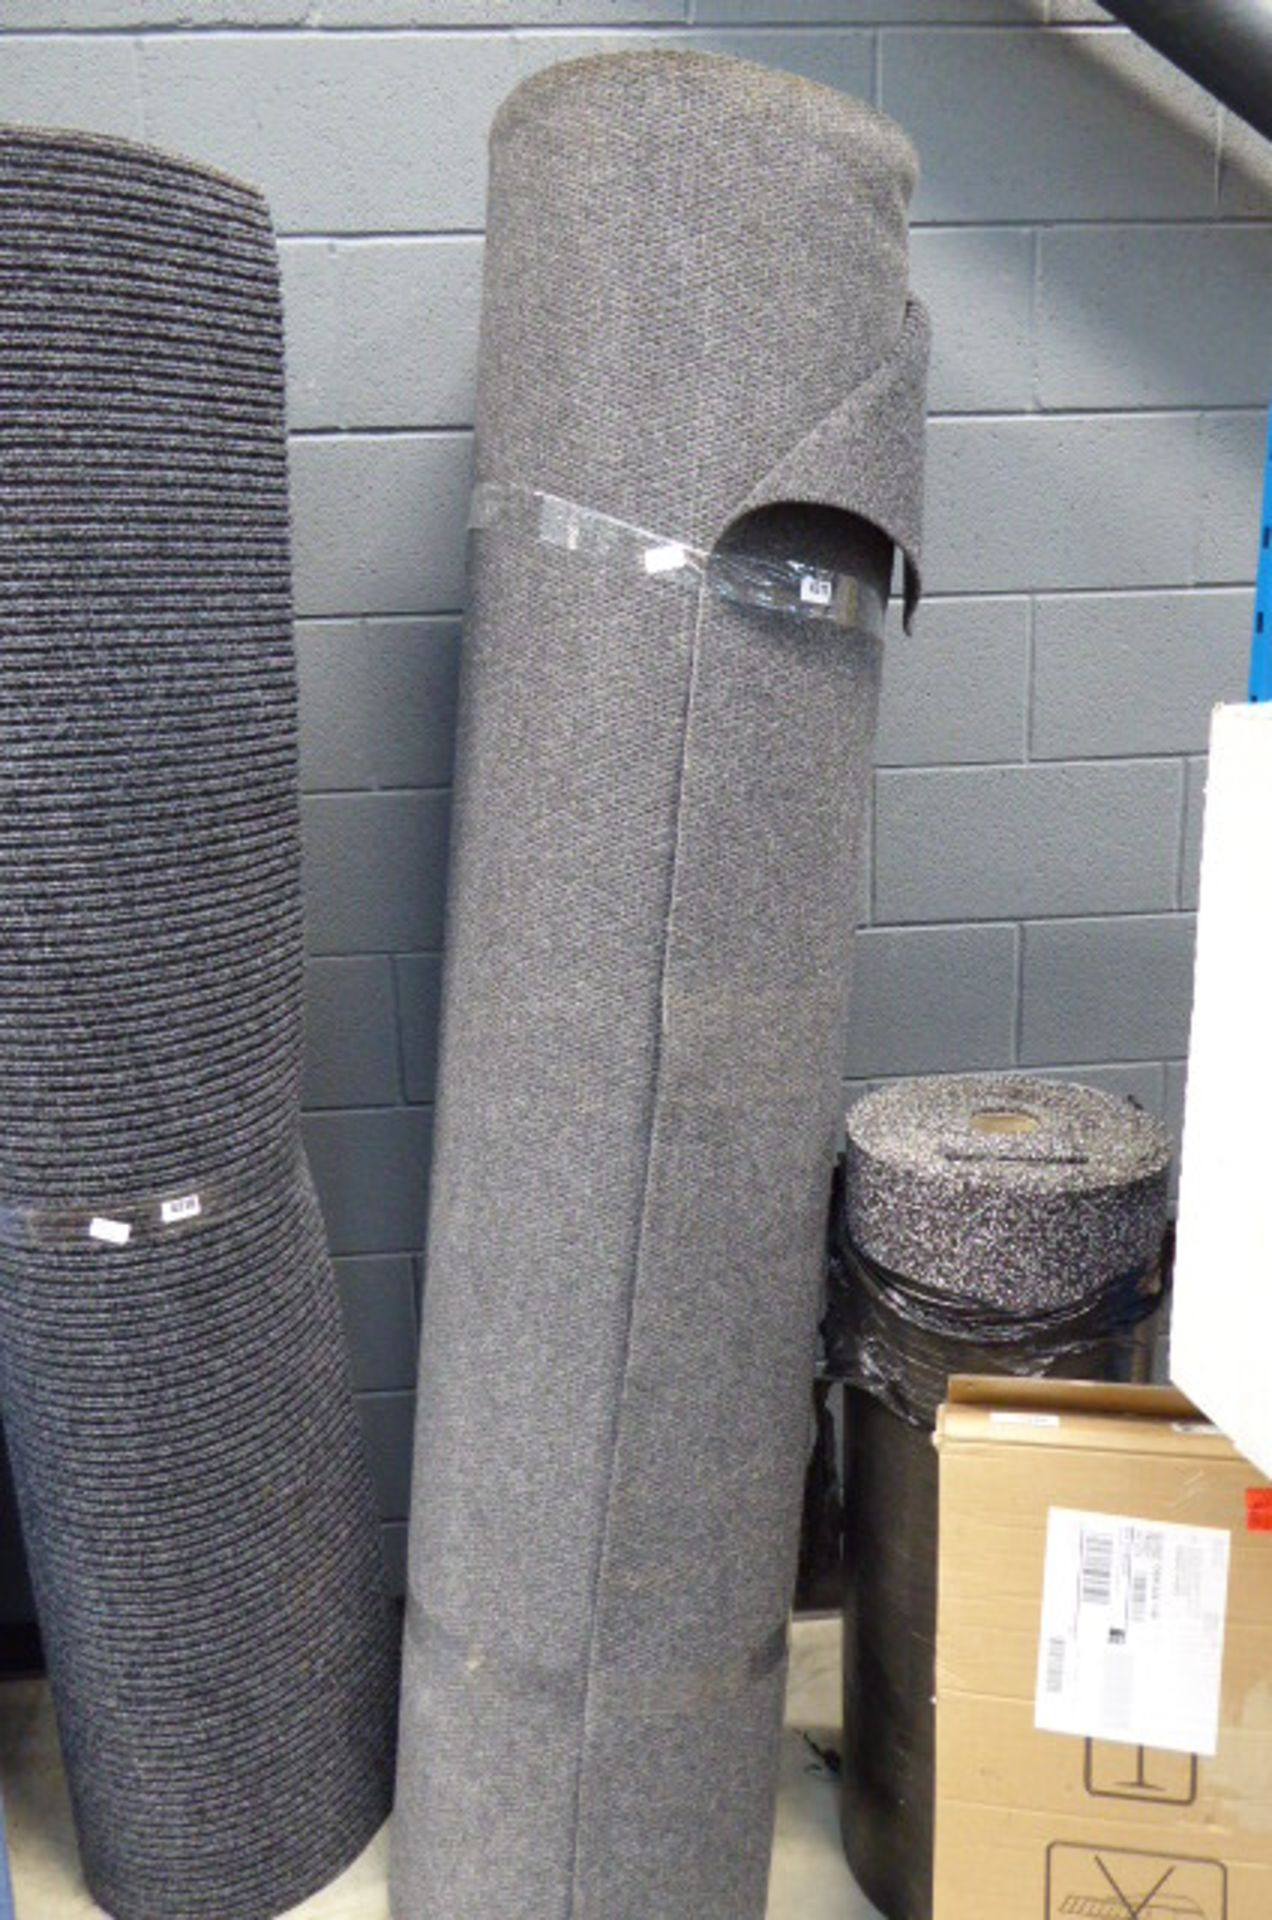 Large grey roll of heavy duty corded carpet